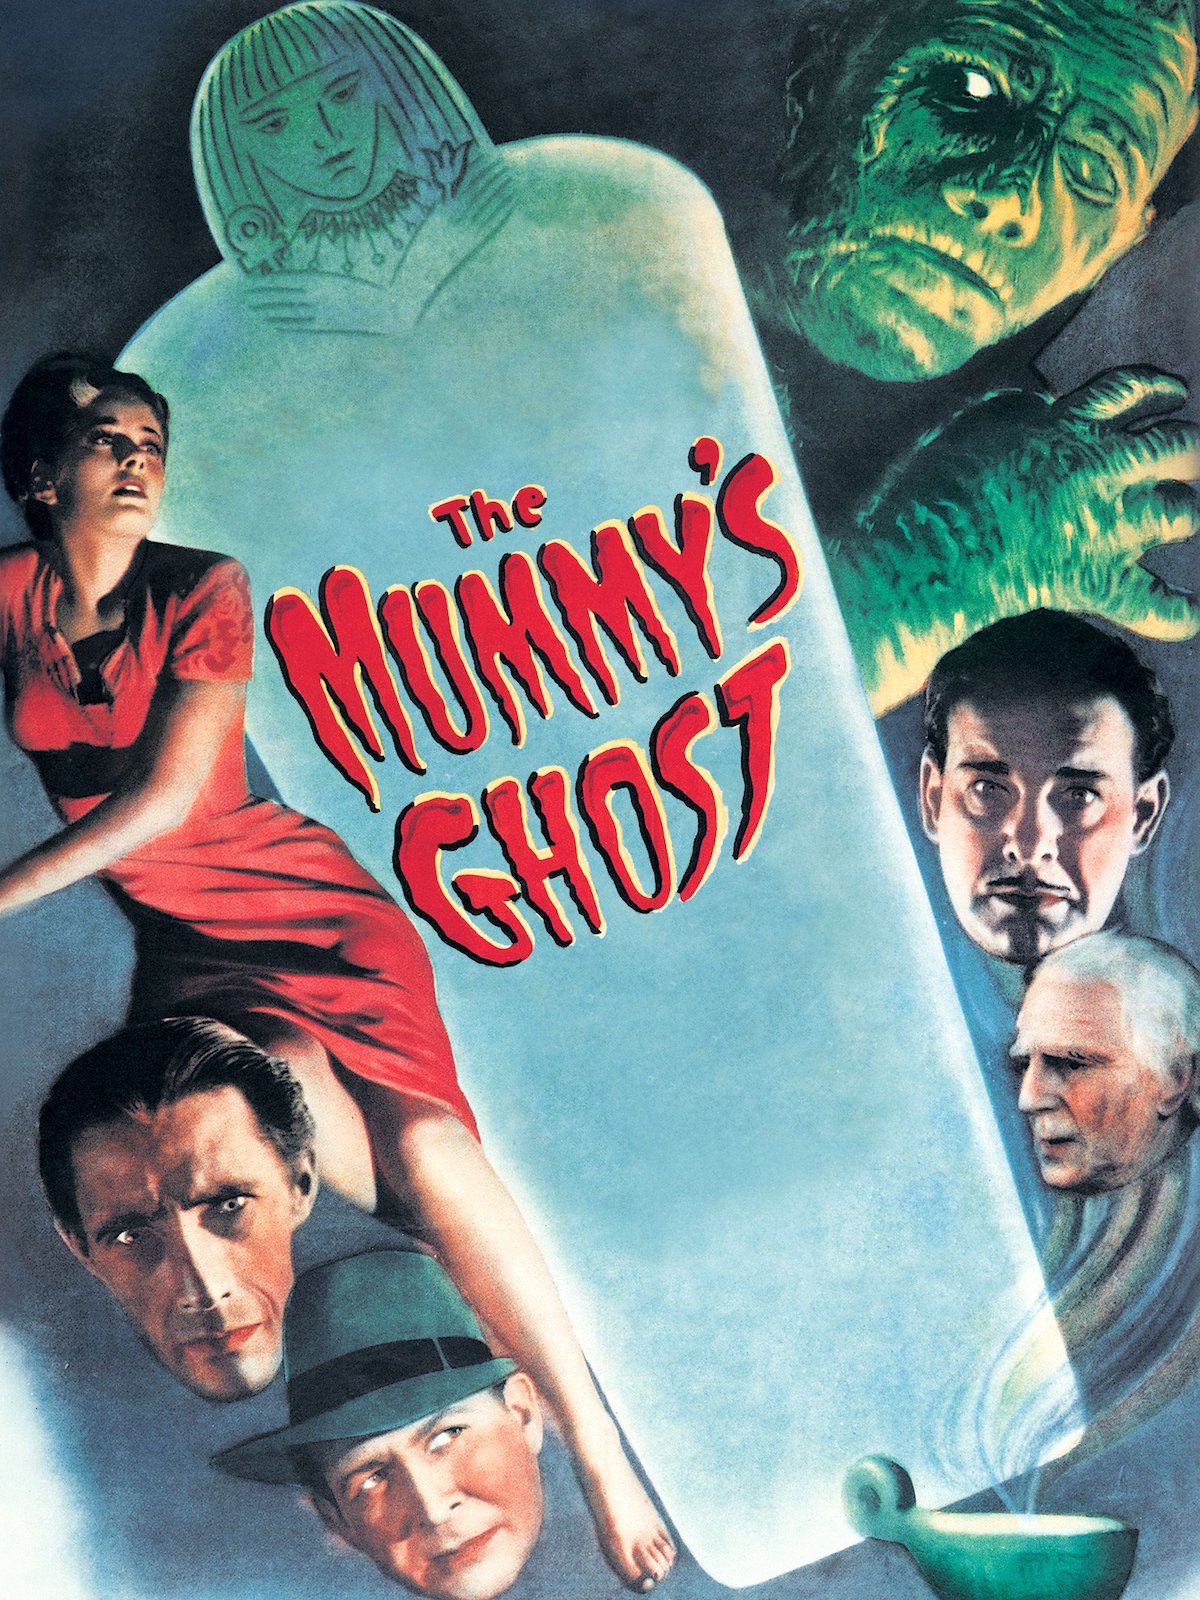 The Mummy's Ghost (1944) starring Lon Chaney Jr. and John Carradine